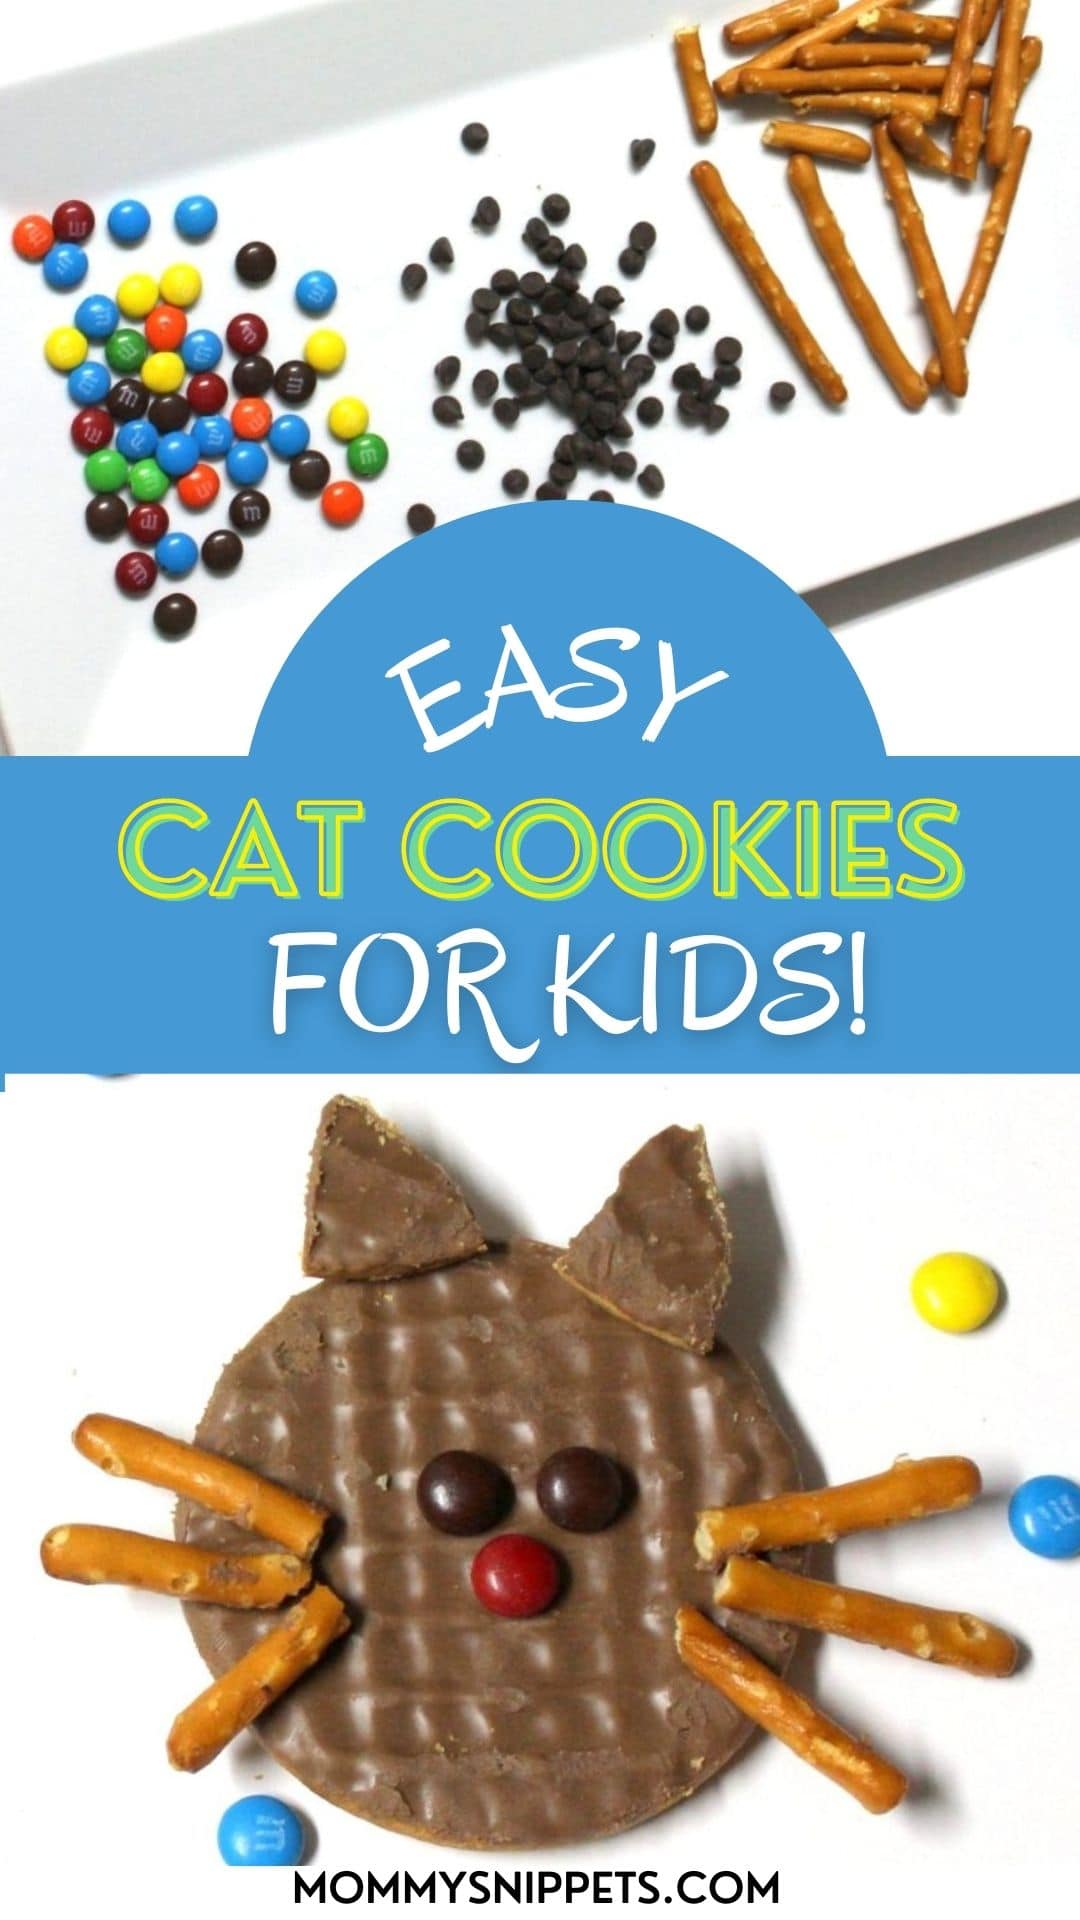 Easy Cat Cookies - a Fun Food Craft Your Child Will Love!